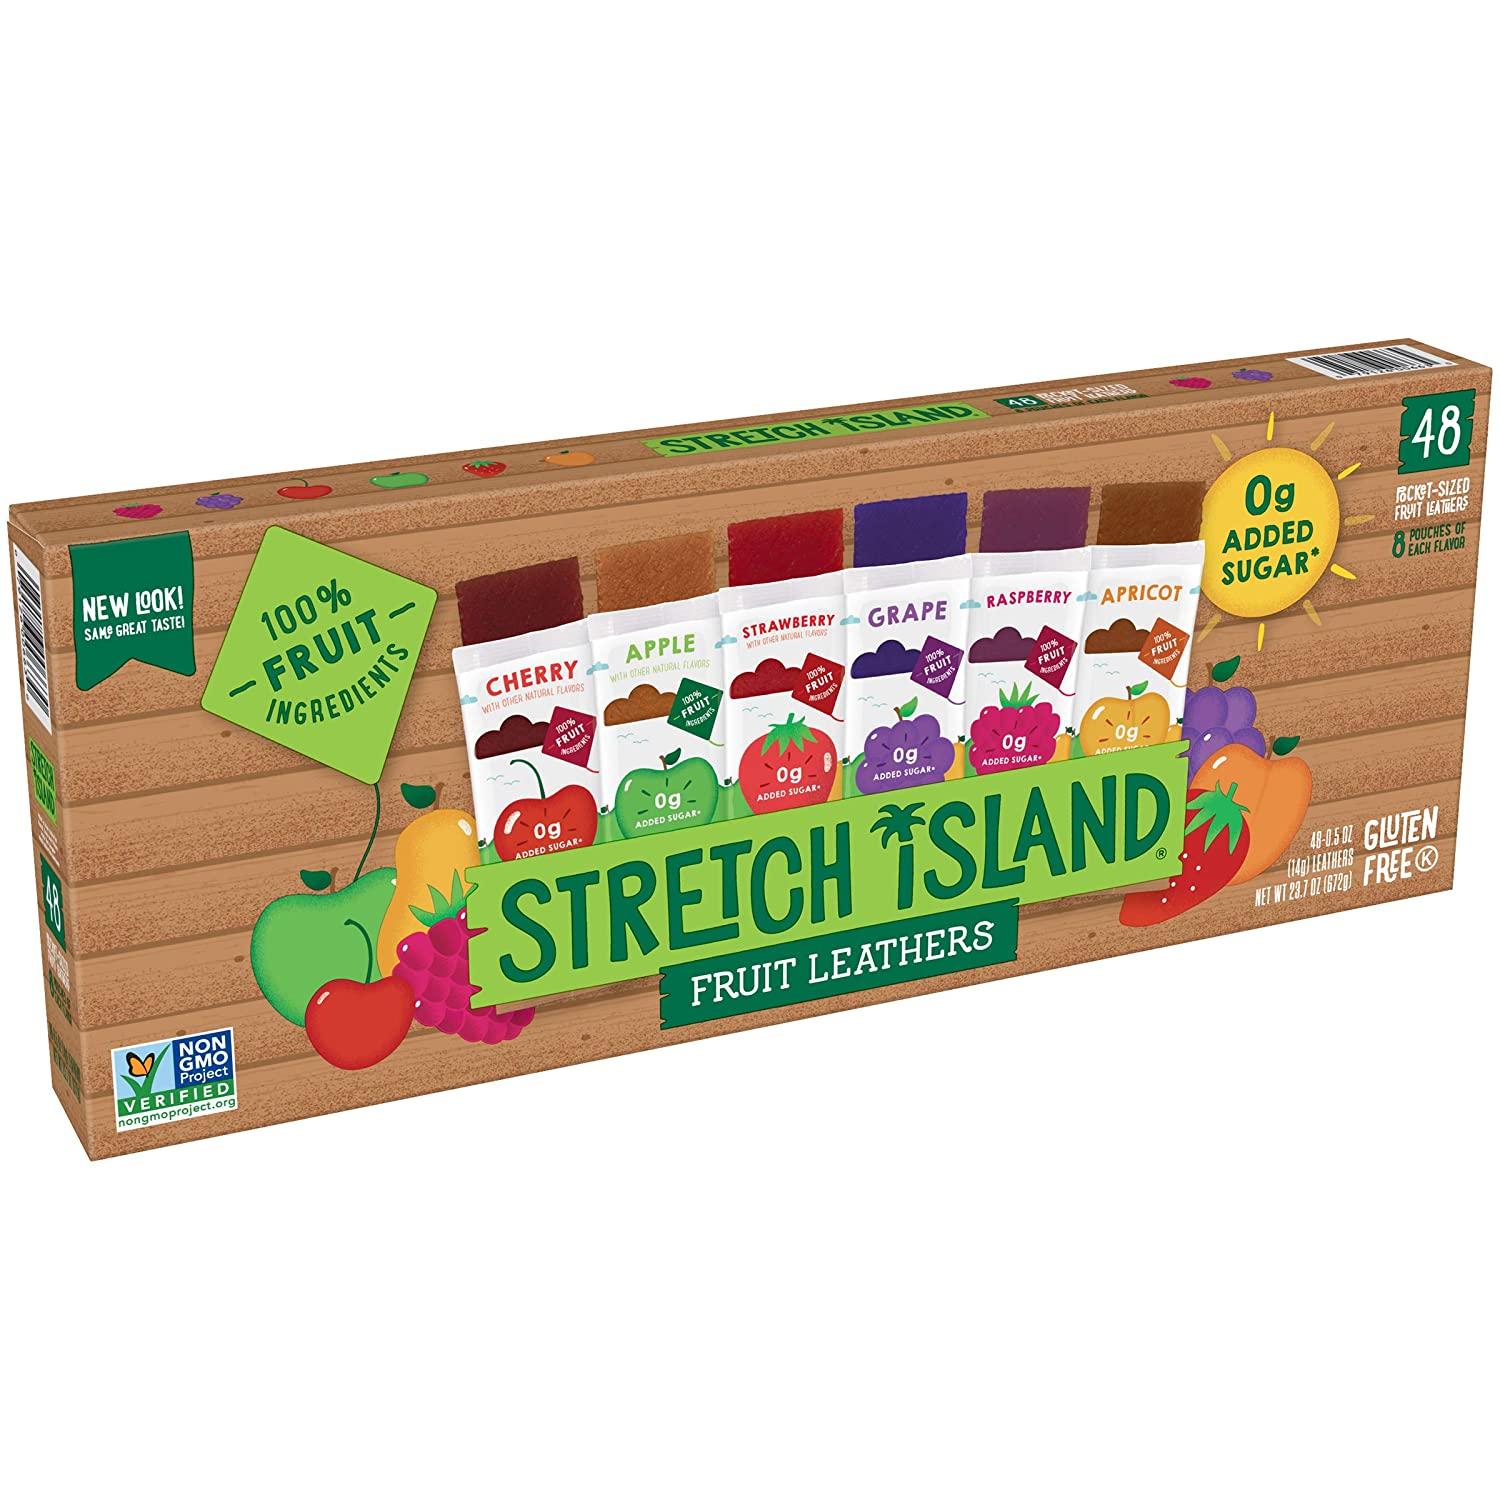 48 Stretch Island Fruit Leather for $8.58